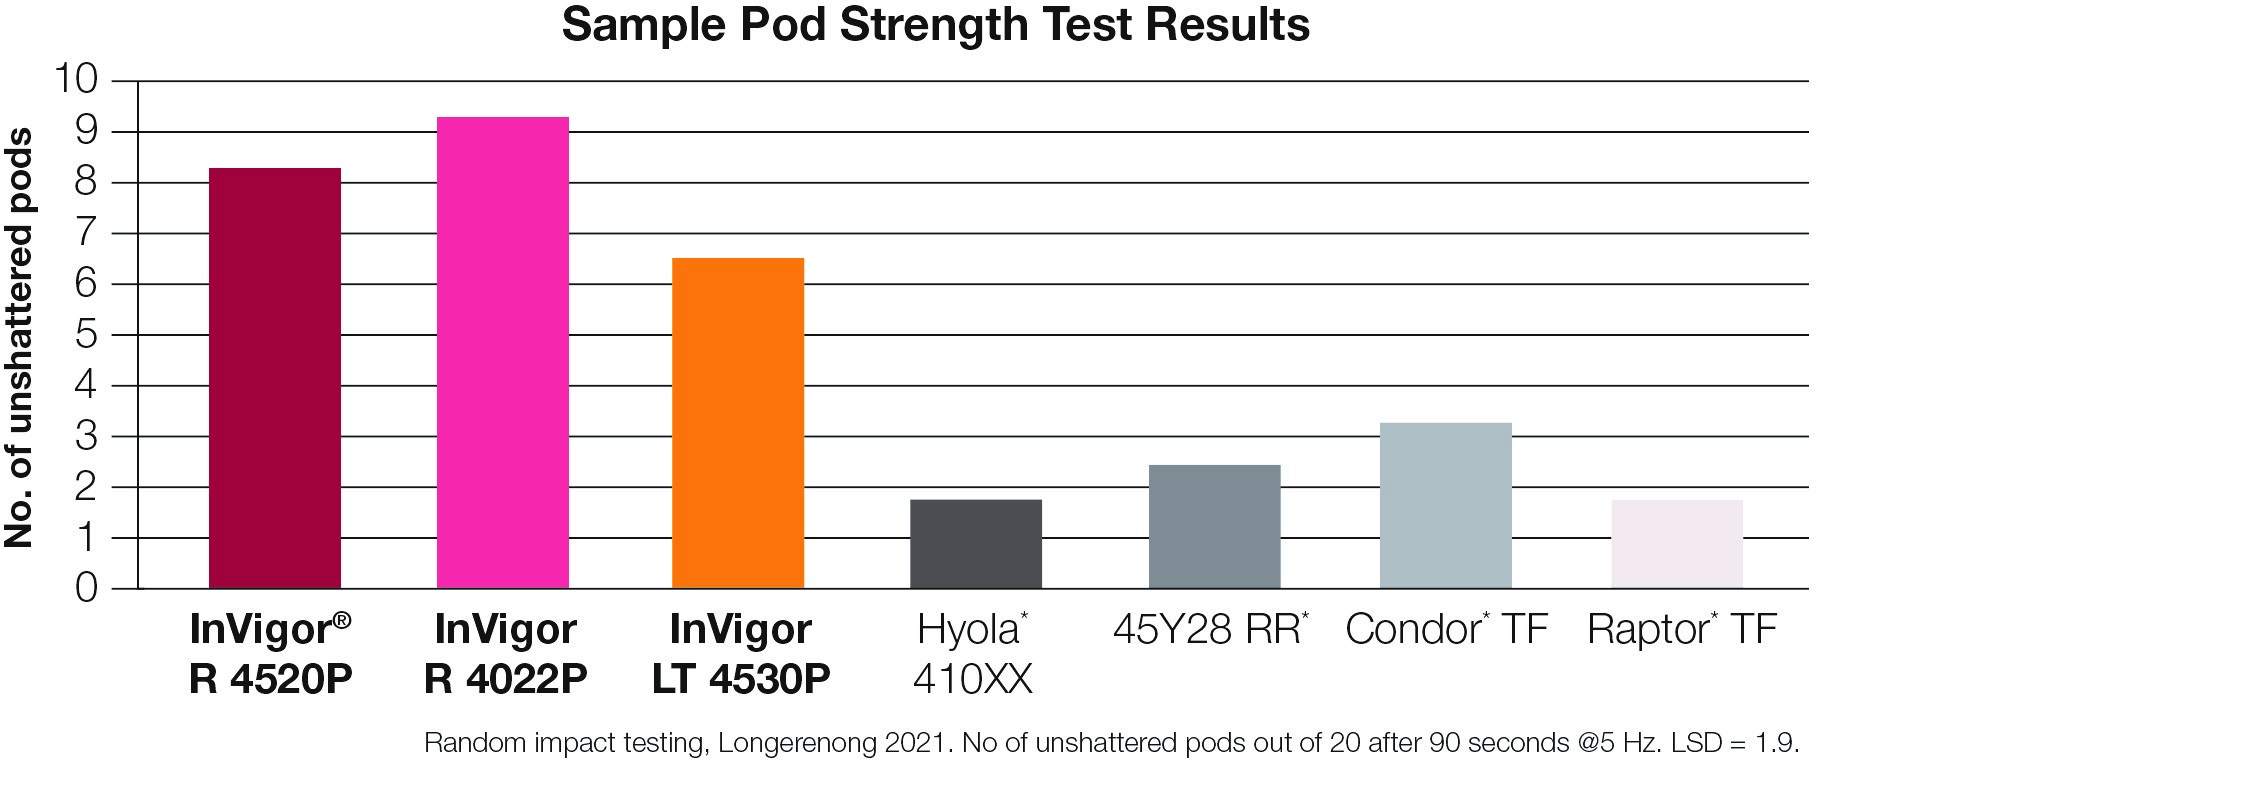 Graph showing Sample Pod Strength Test Results